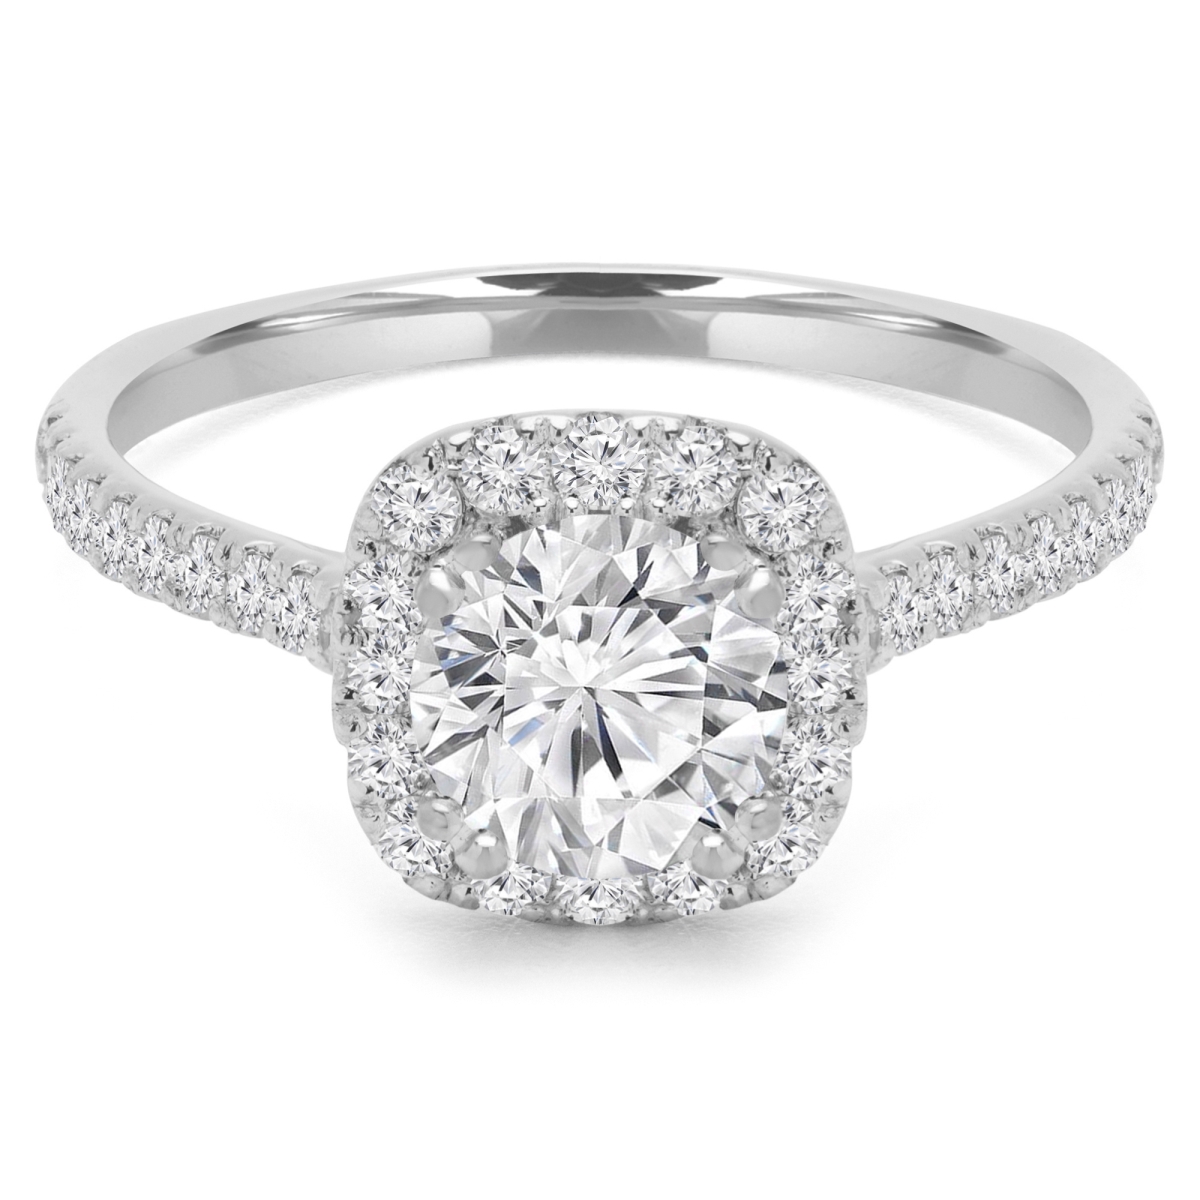 Picture of Majesty Diamonds MD190231-P 1 CTW Round Diamond Cushion Halo Engagement Ring in 14K White Gold with Accents